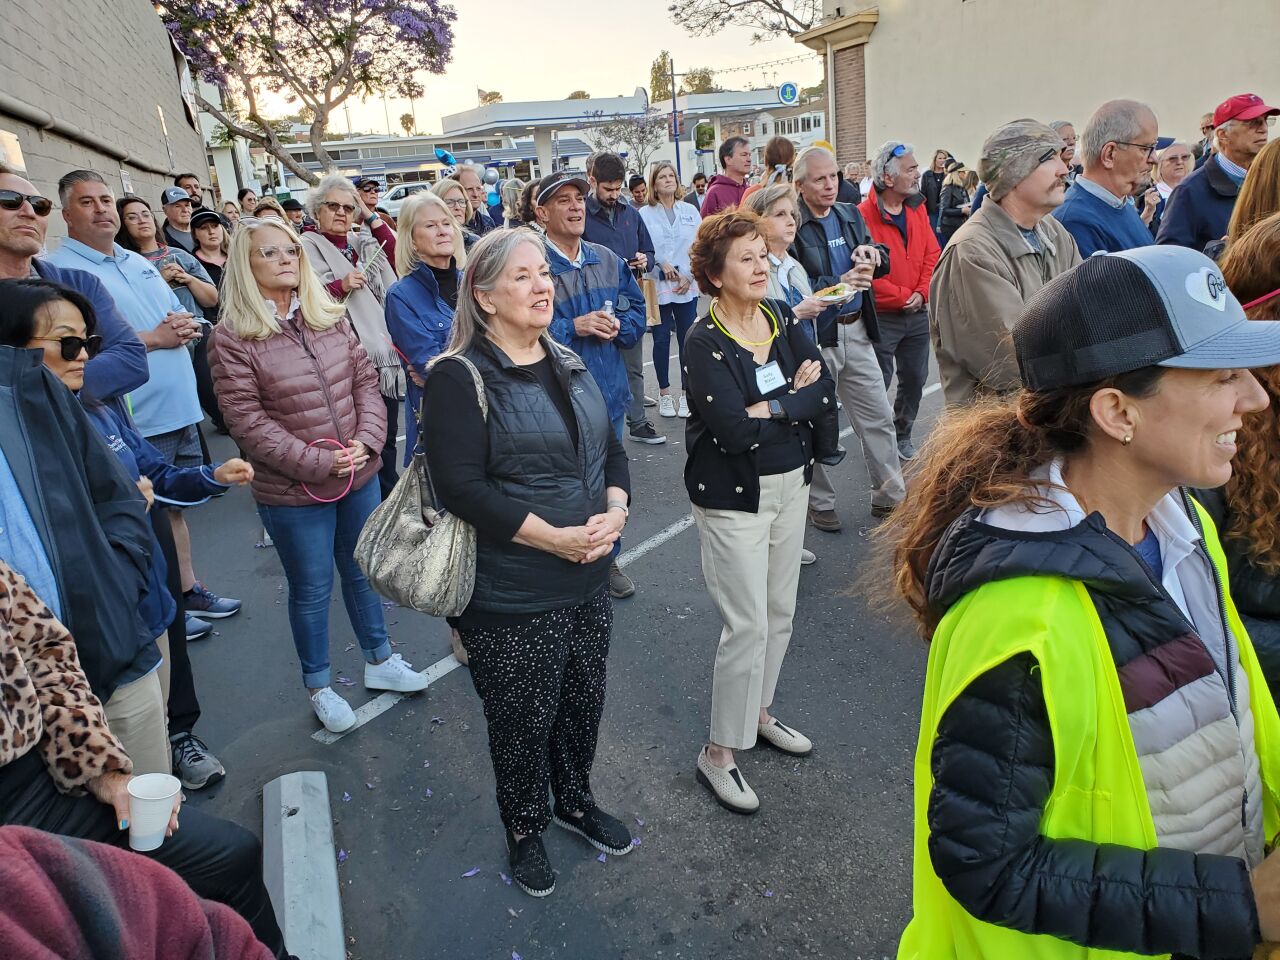 A crowd of Point Loma residents attends the celebratory lighting of Rosecrans Street with the overhead Village Lights.